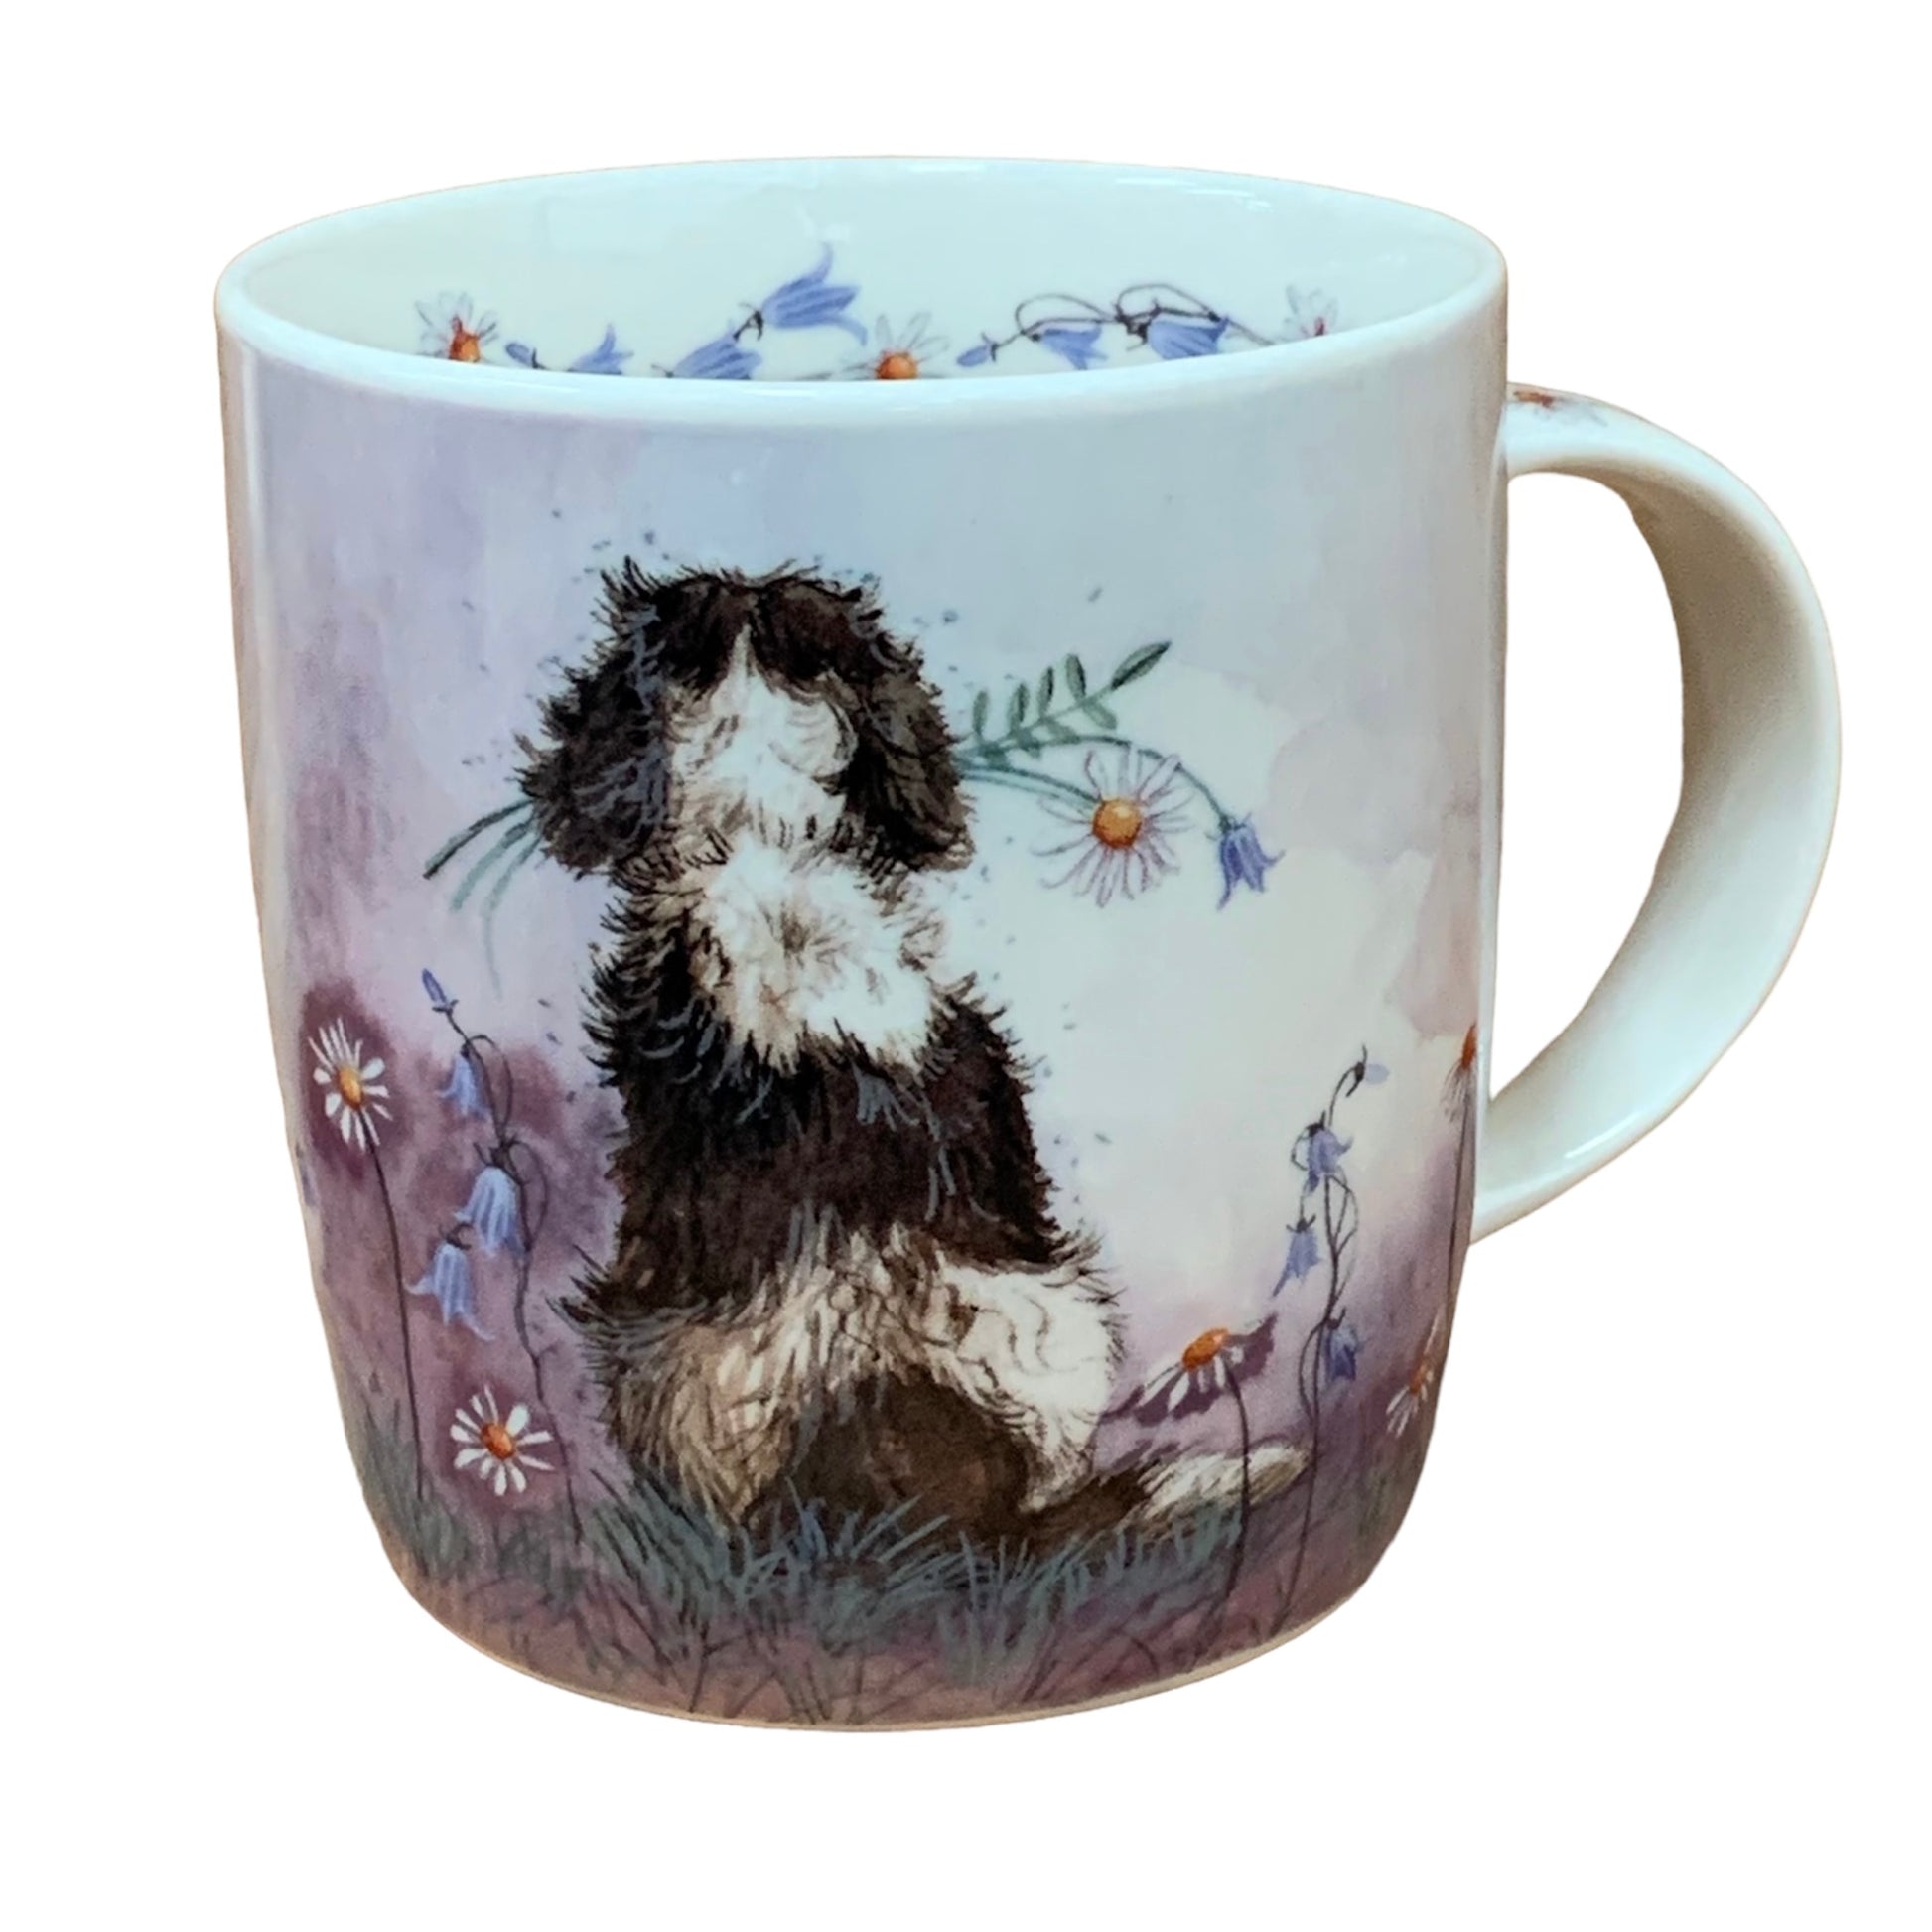 Alex Clark mug is illustrated with a lovely Spaniel dog admiring the view & holding a flower in its mouth